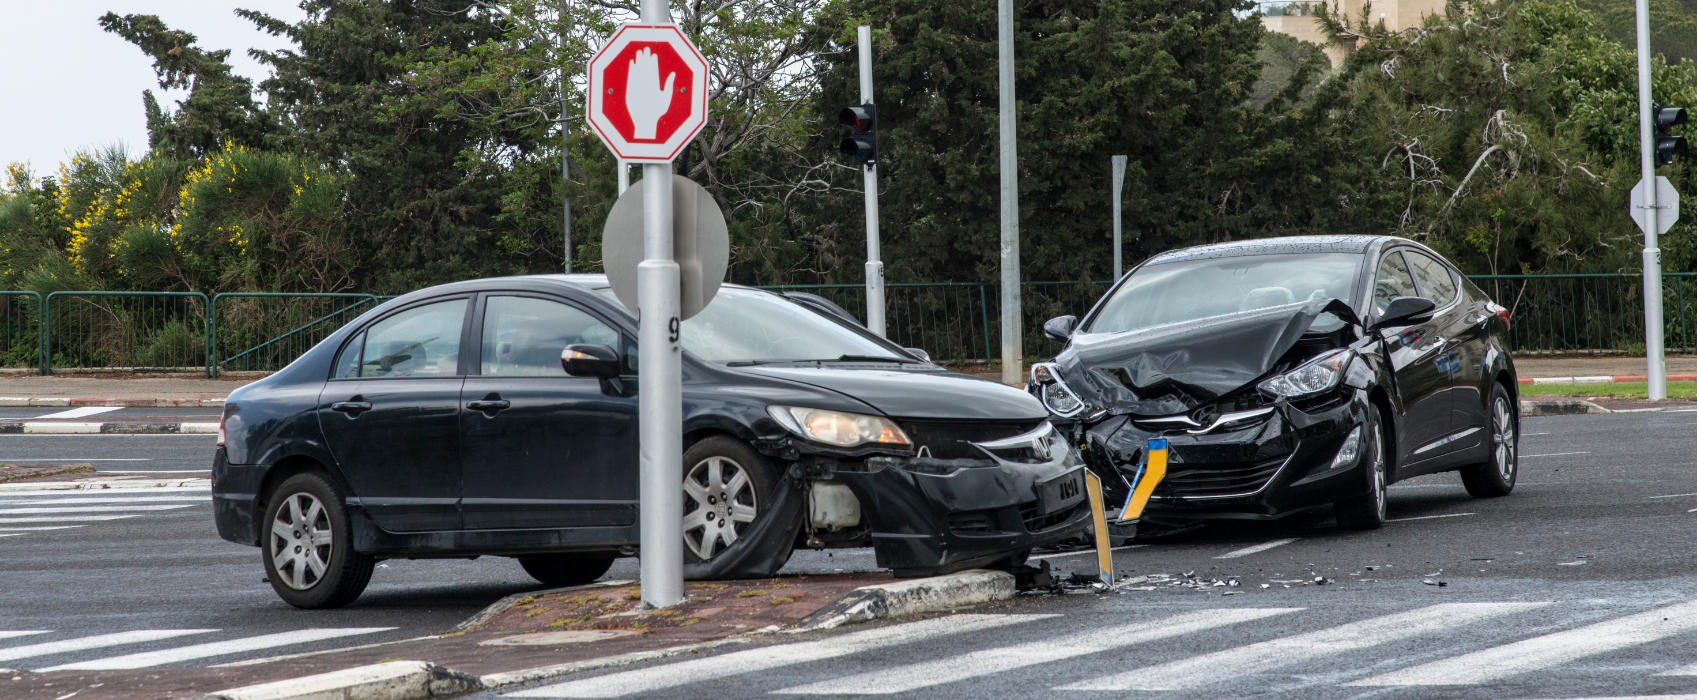 car accident at an intersection, Augusta car accident lawyers | Car accident attorneys in Augusta GA